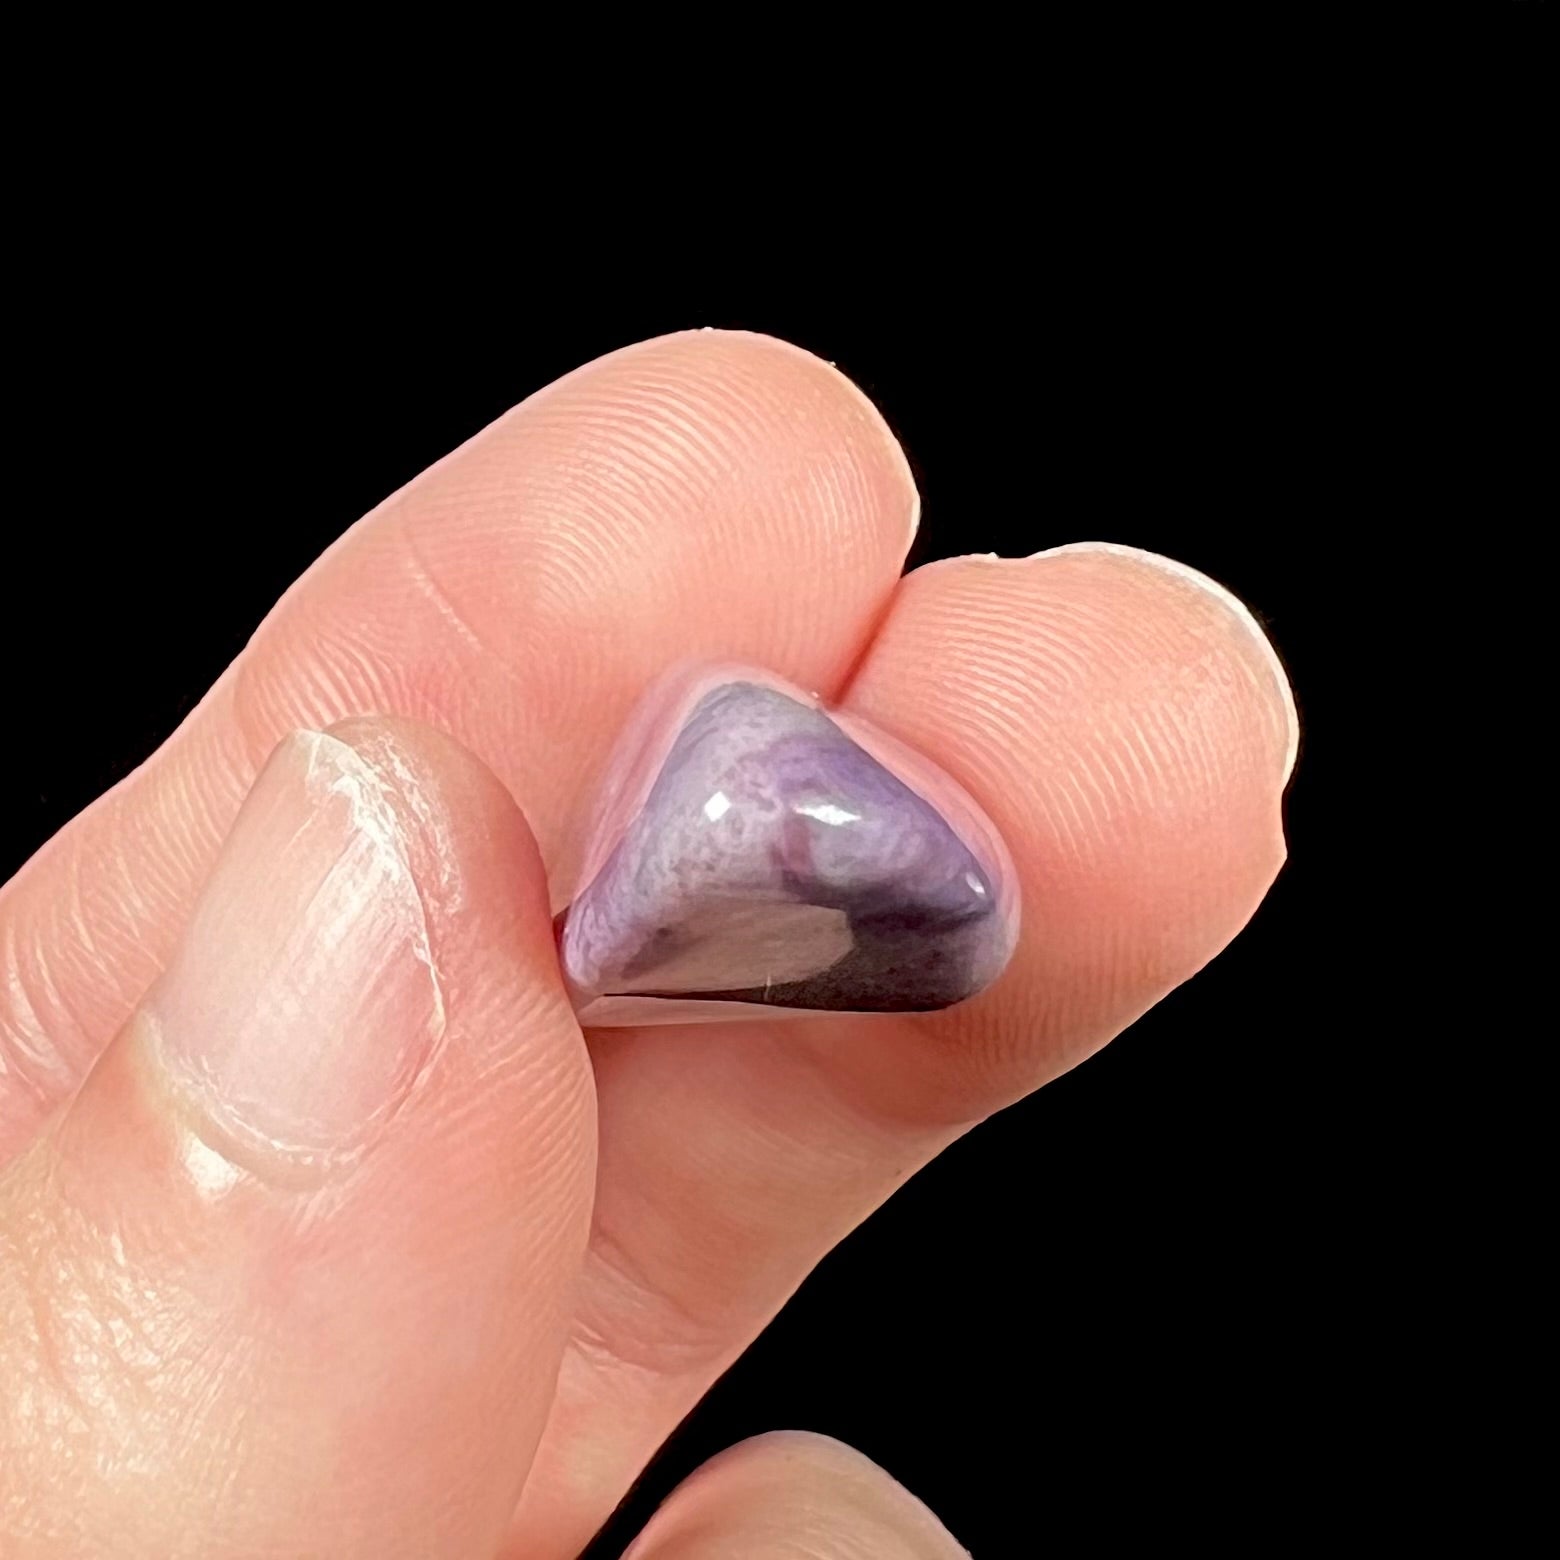 A tumble polished piece of speckled turkiyenite stone, also known as Turkish purple jade.